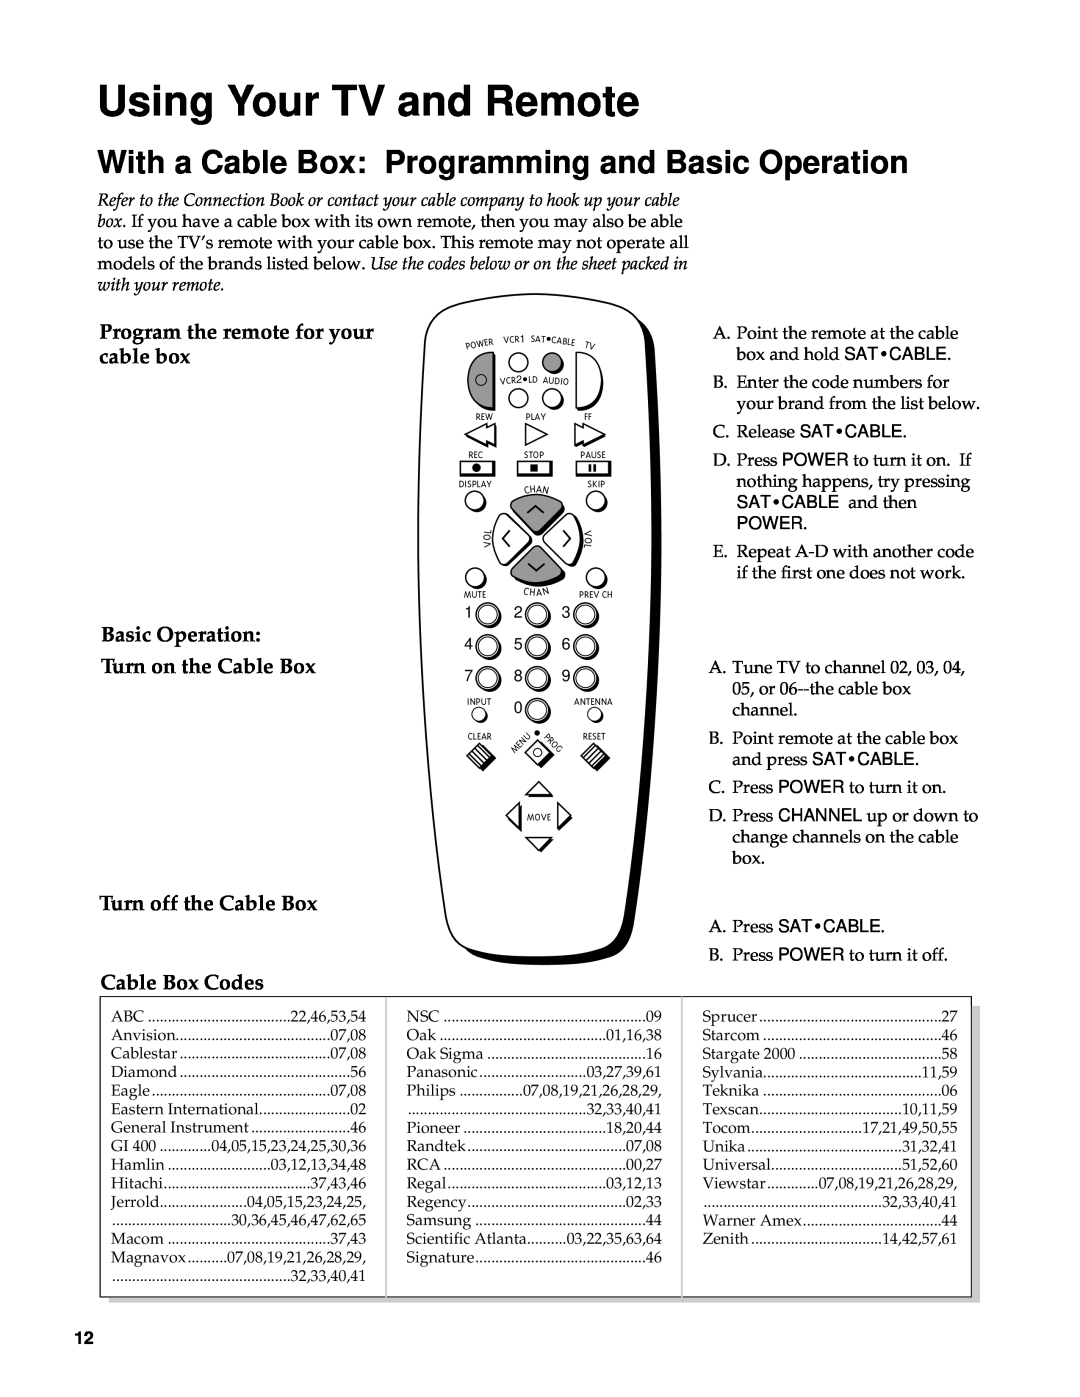 RCA 27000 With a Cable Box Programming and Basic Operation, Program the remote for your cable box, Turn on the Cable Box 